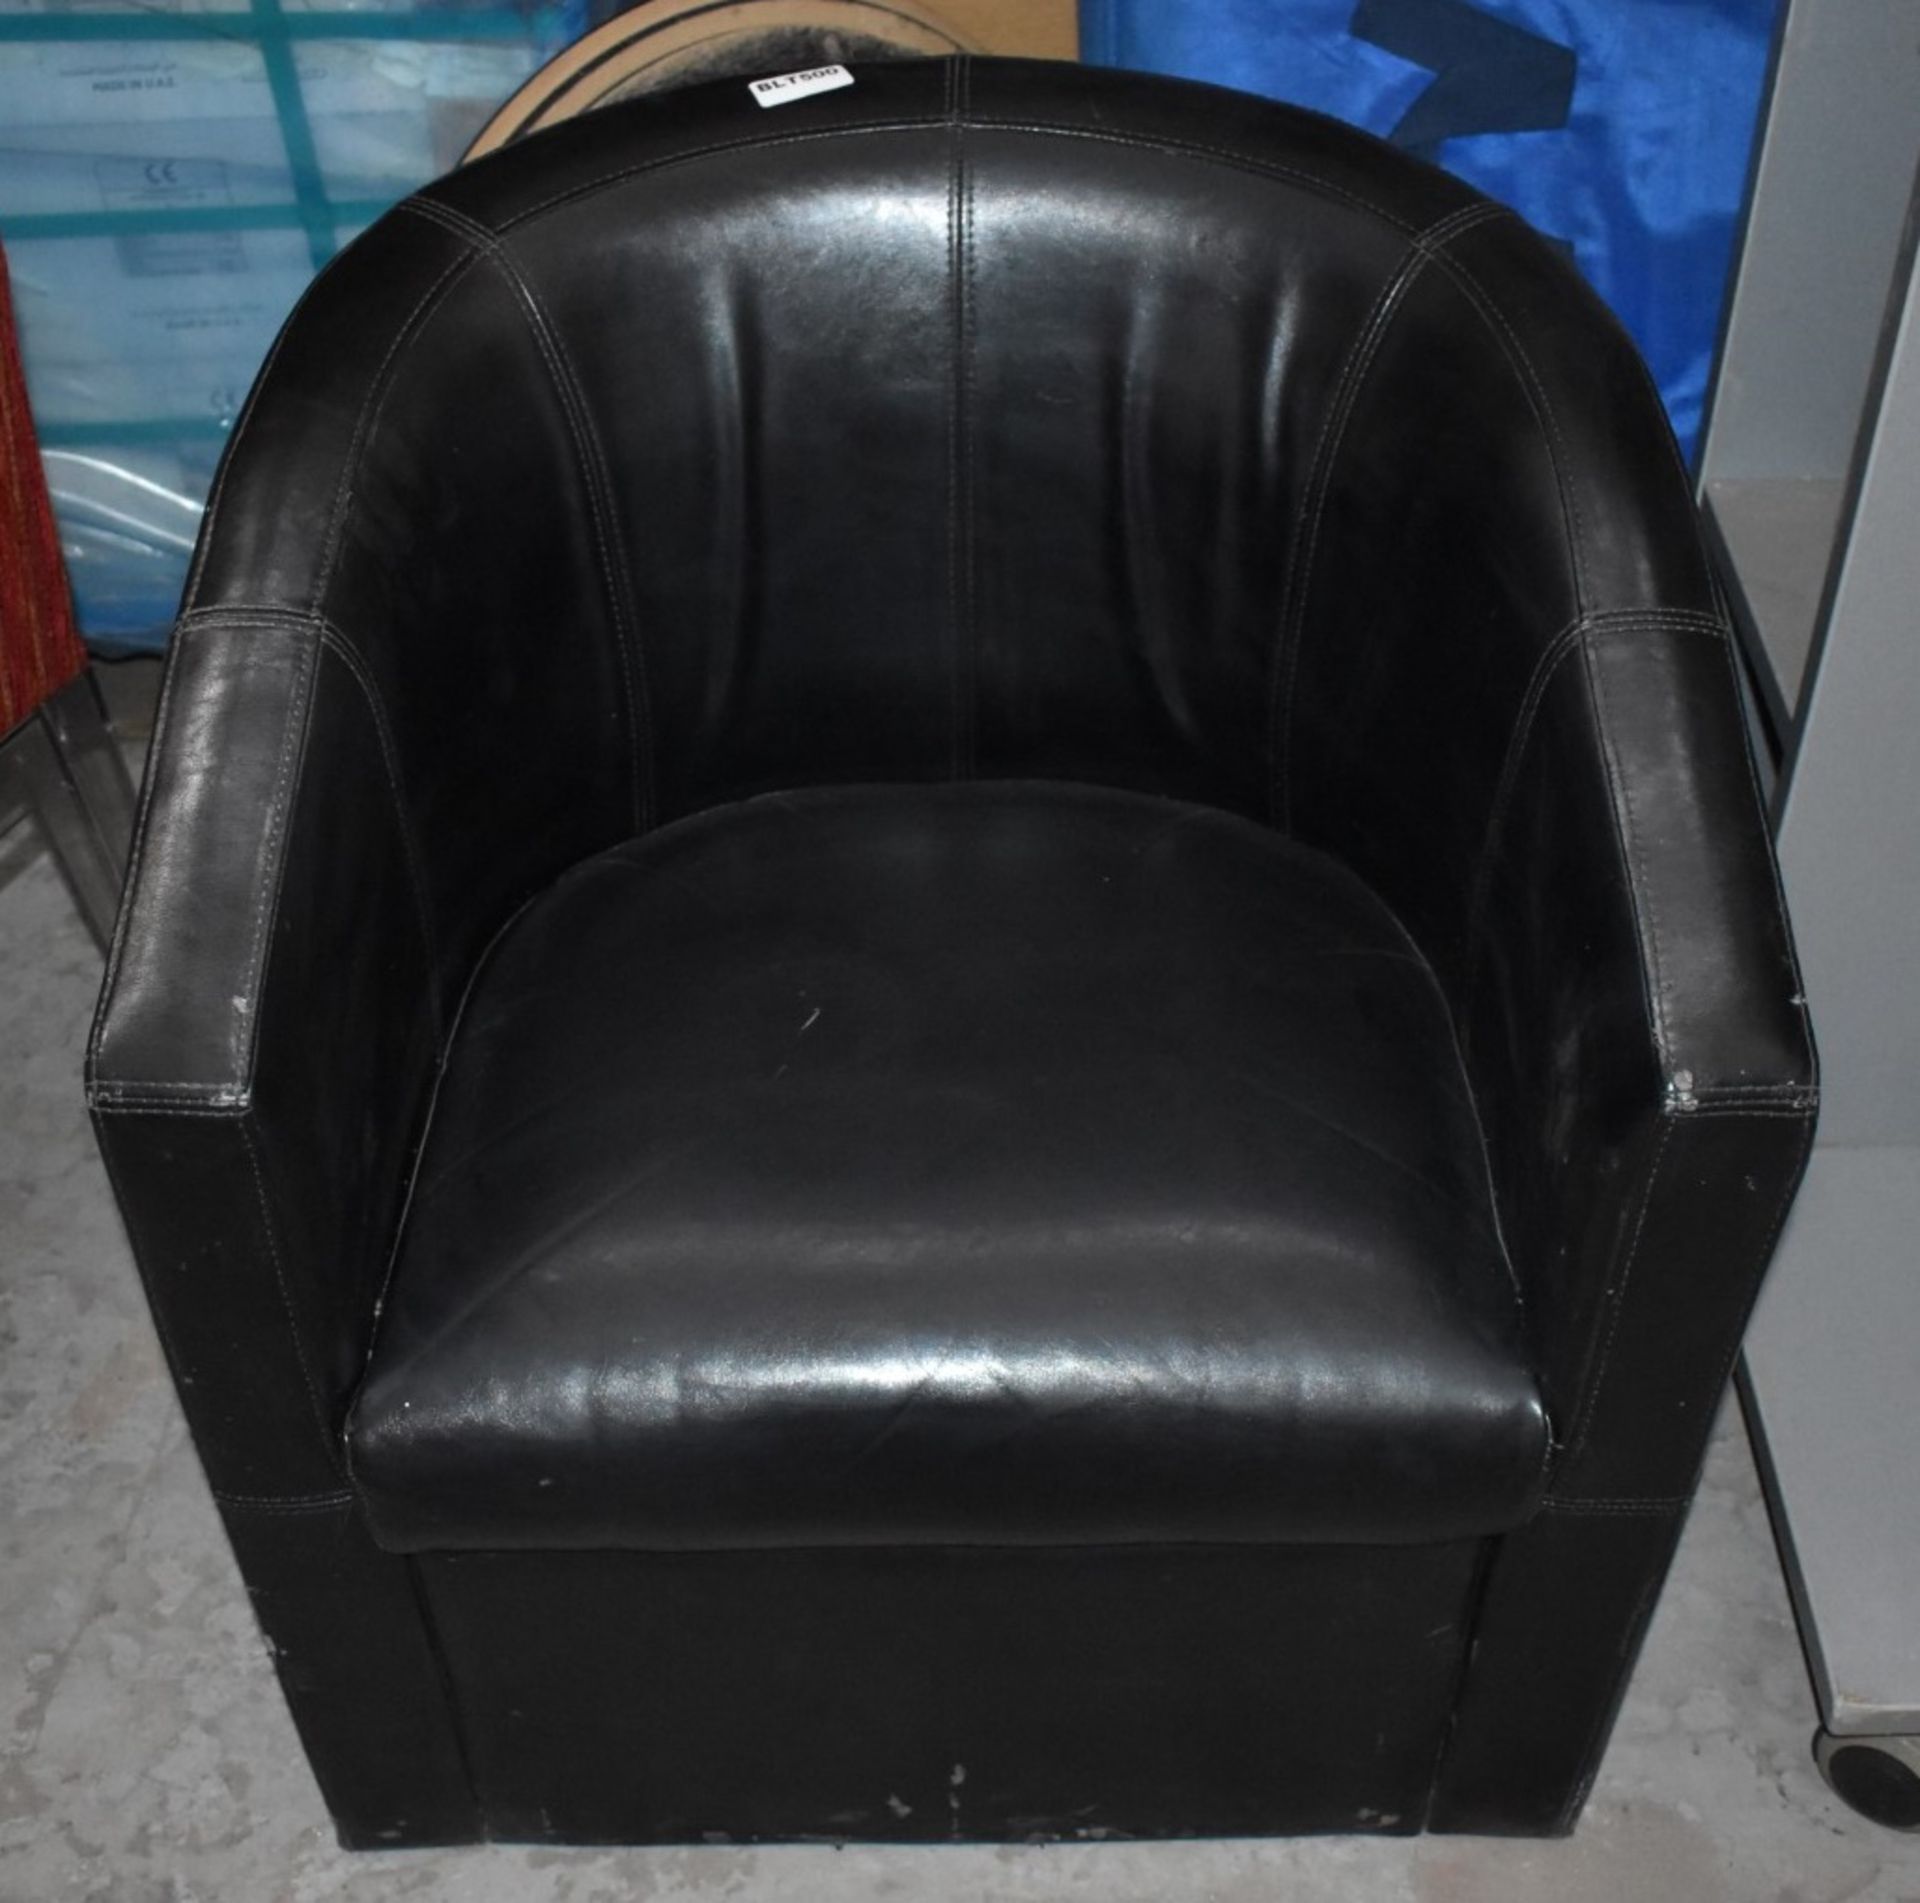 1 x Tub Chair Upholstered in Black Faux Leather - H93 x W68 x D62 cms - Ref BLT500 - CL011 -